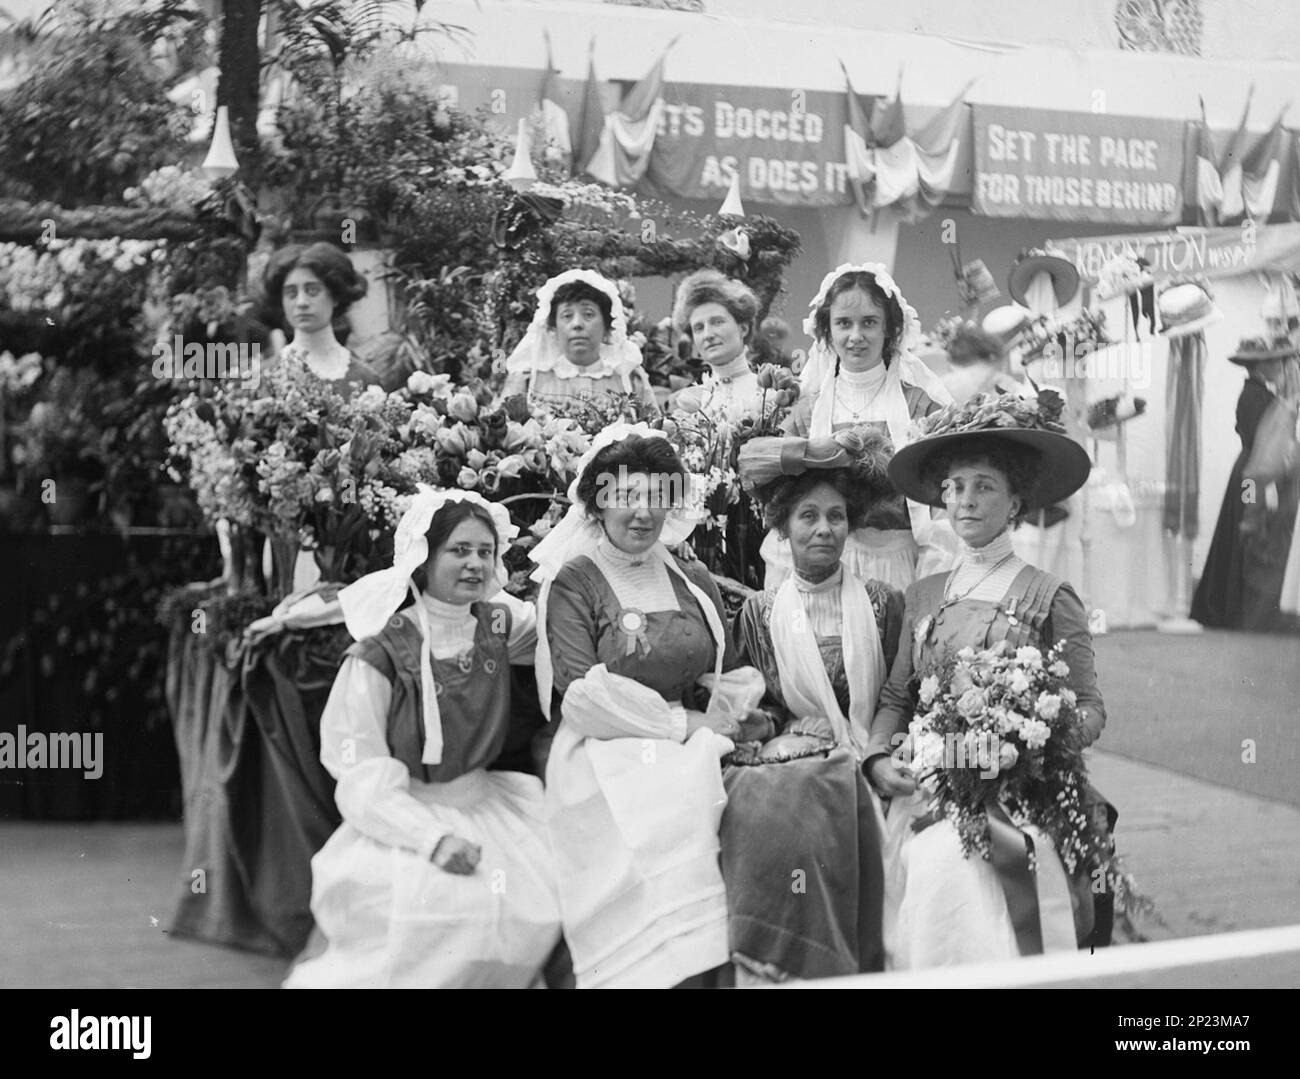 Christina Broom - Suffragette leader Emmeline Pankhurst (front row, third from left), at the flower stall of the Womens Exhibition, London - May 1909 Stock Photo